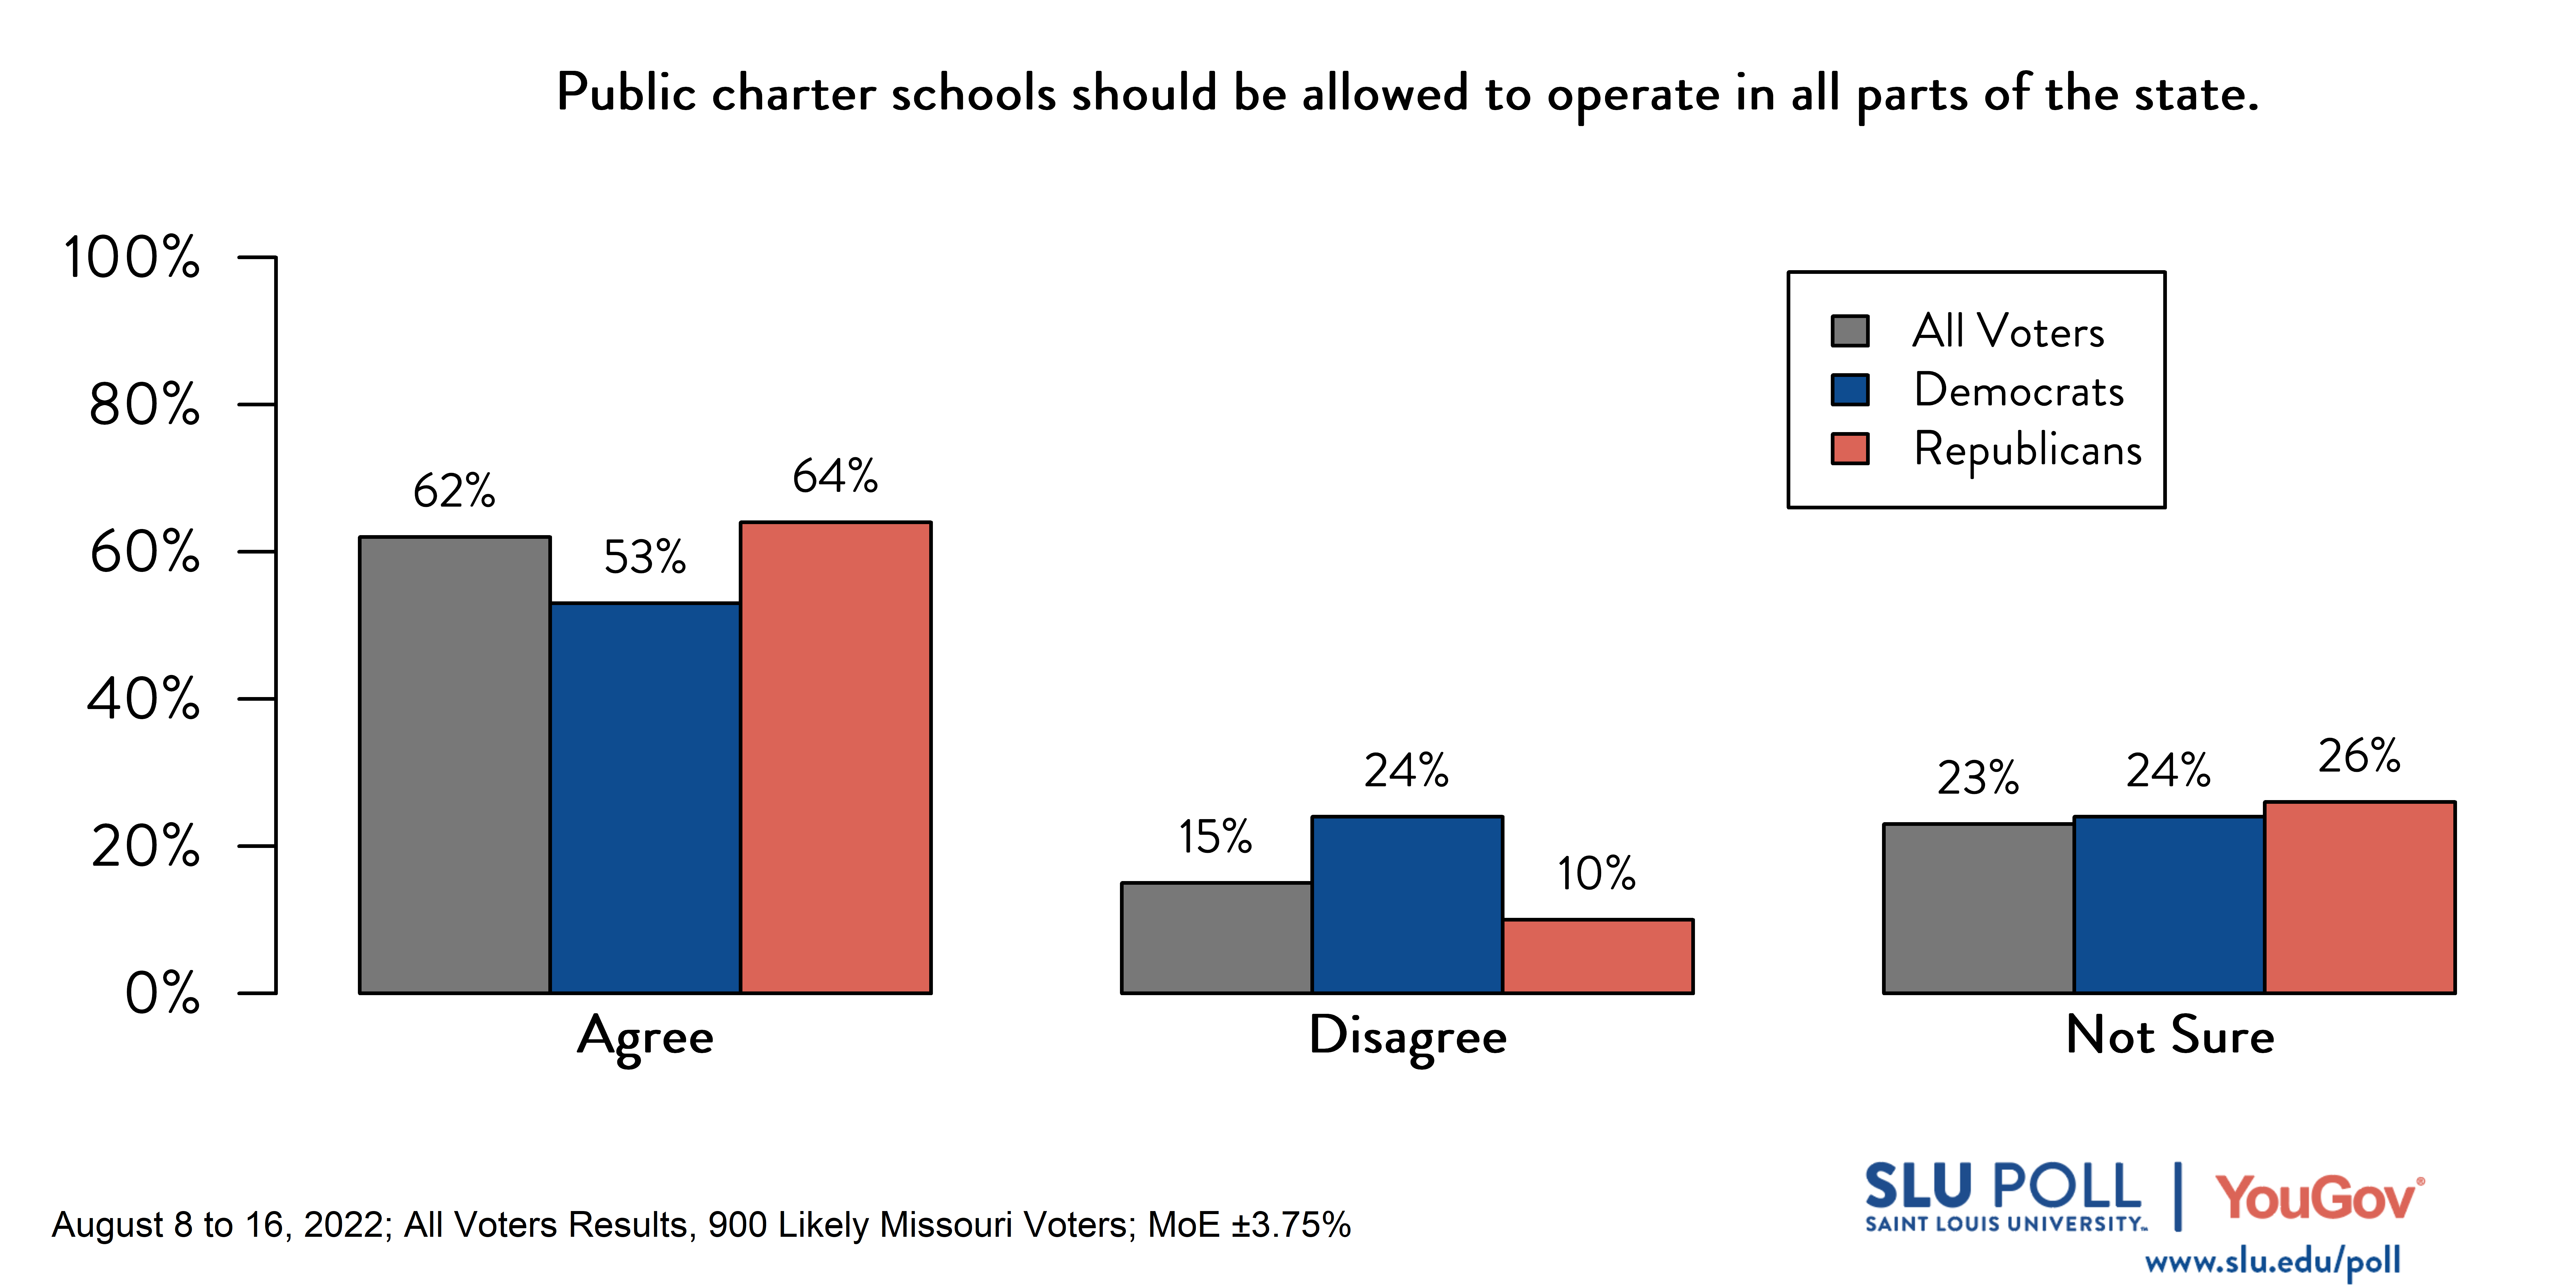 Likely voters' responses to 'Do you agree or disagree with the following statements?�Public charter schools should be allowed to operate in all parts of the state.': 62% Agree, 15% Disagree, and 23% Not Sure. Democratic voters' responses: ' 53% Agree, 24% Disagree, and 24% Not Sure. Republican voters' responses: 64% Agree, 10% Disagree, and 26% Not Sure. 